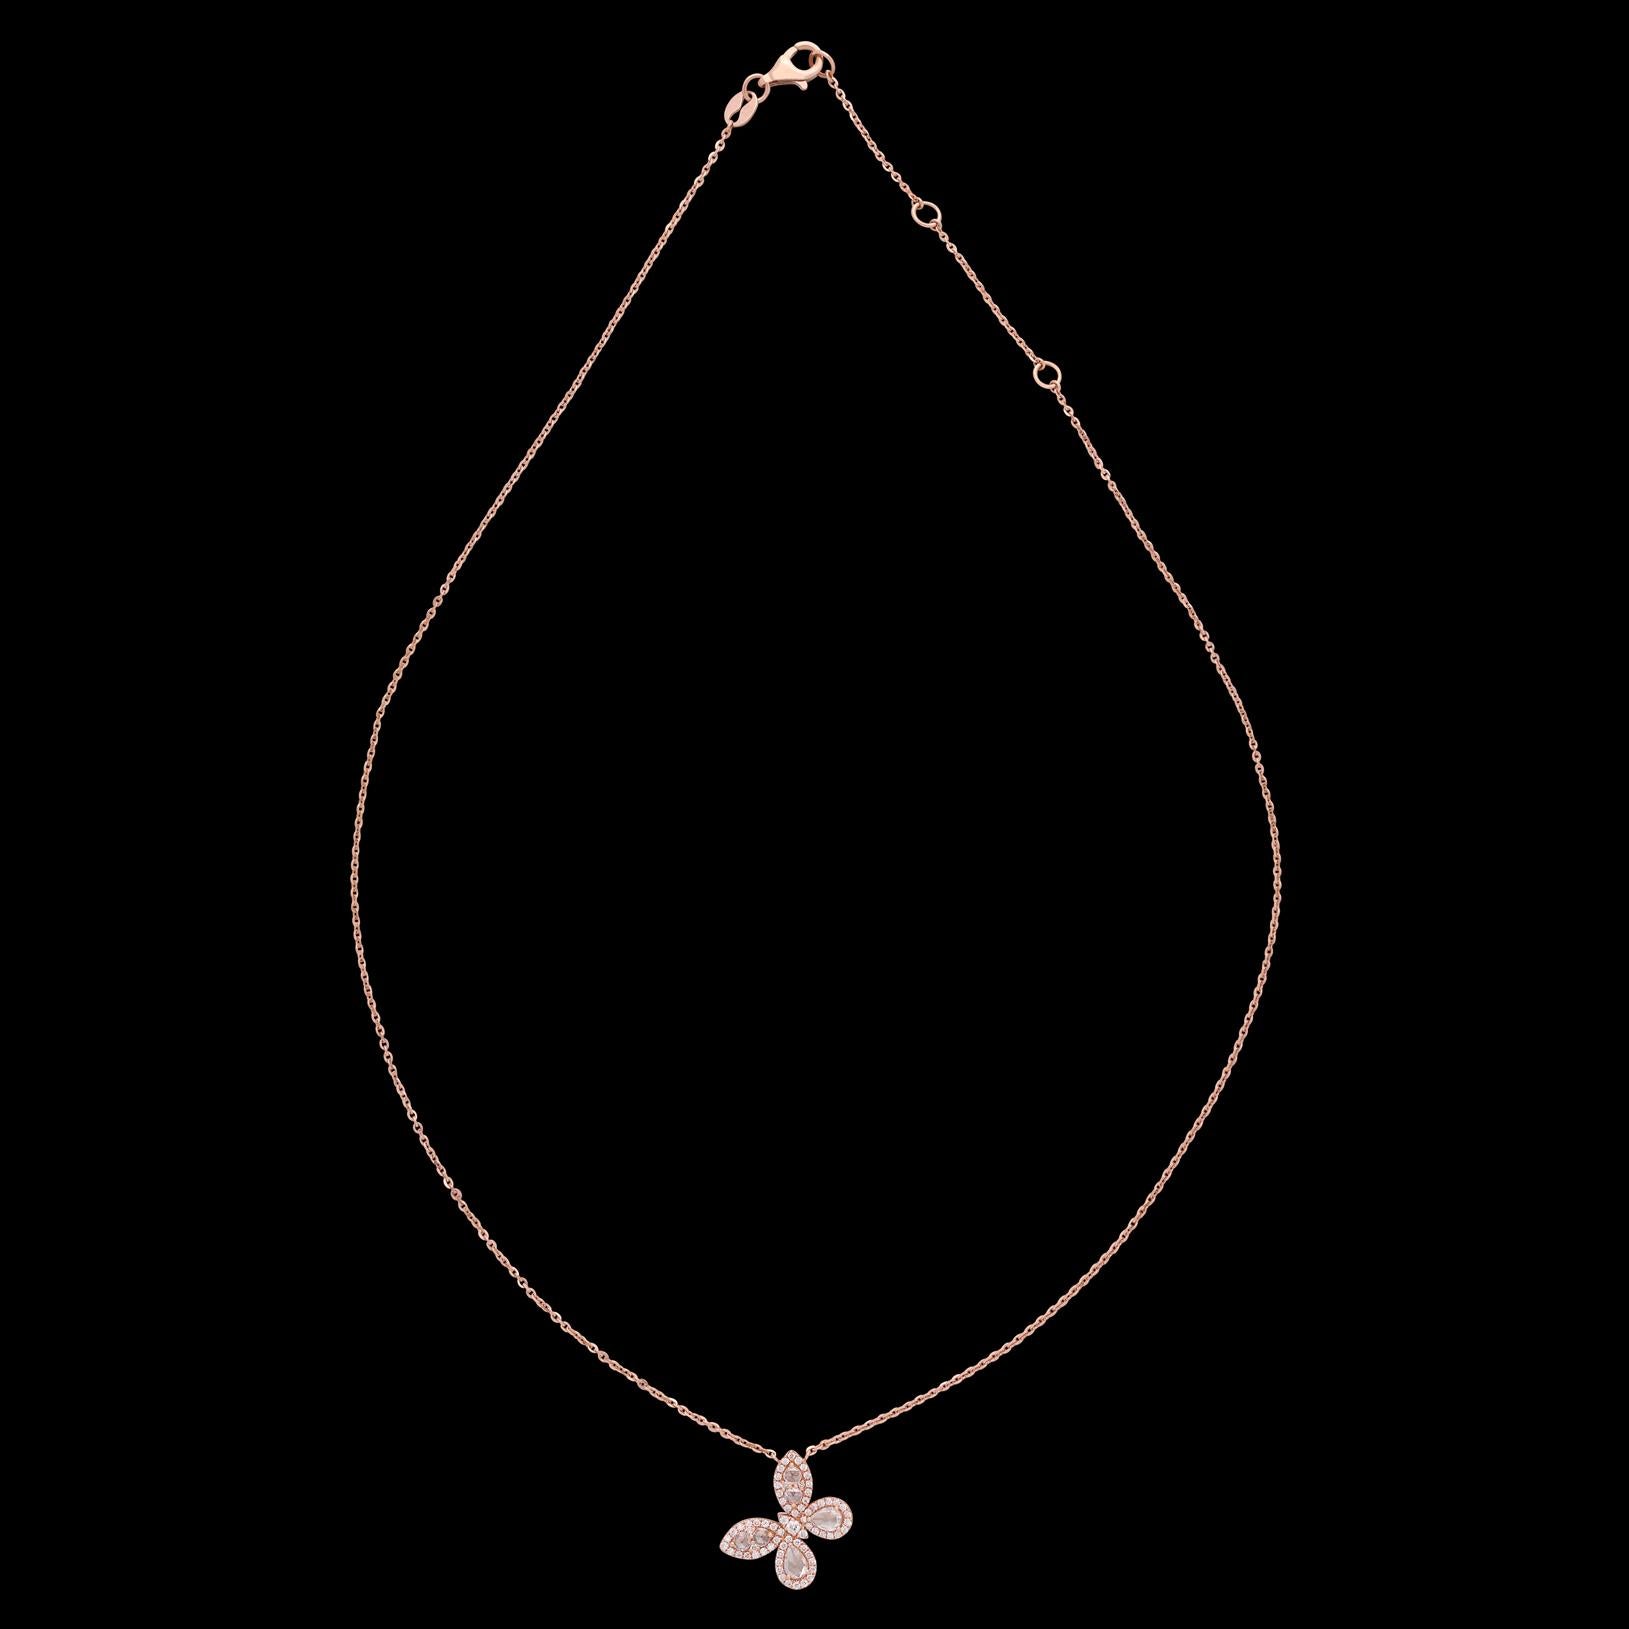 Delicate and elegant, this might just be the perfect gift. Suspended from a lovely 18 karat Rose Gold chain is a diamond pendant in the shape of a butterfly. Two Pear Shaped Diamonds are featured in the lower wings, while a number of fine melee